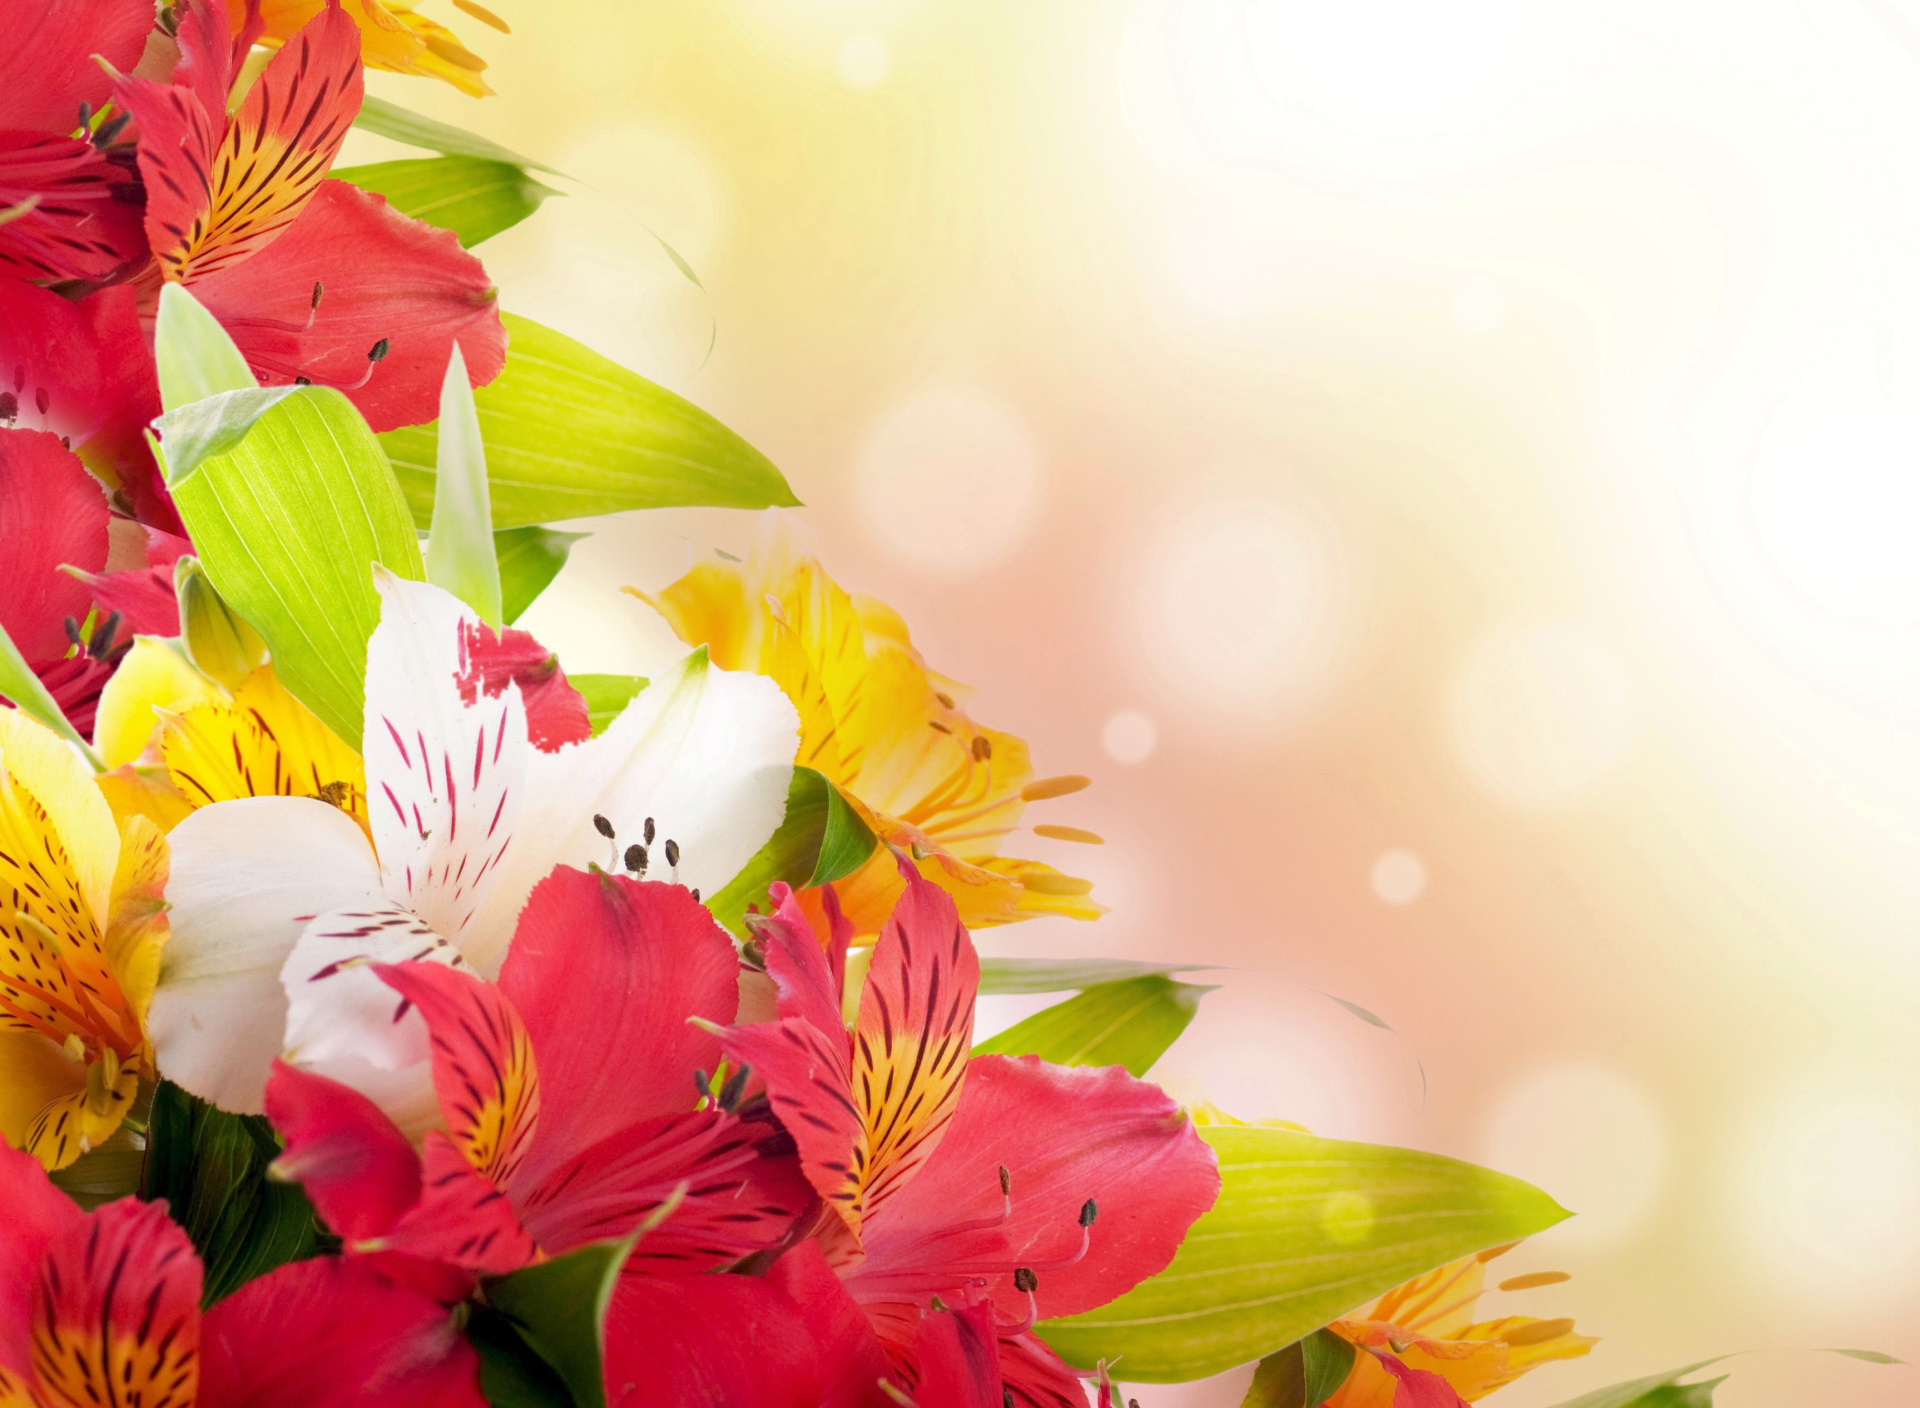 Flowers for the holiday of March 8 wallpaper 1920x1408